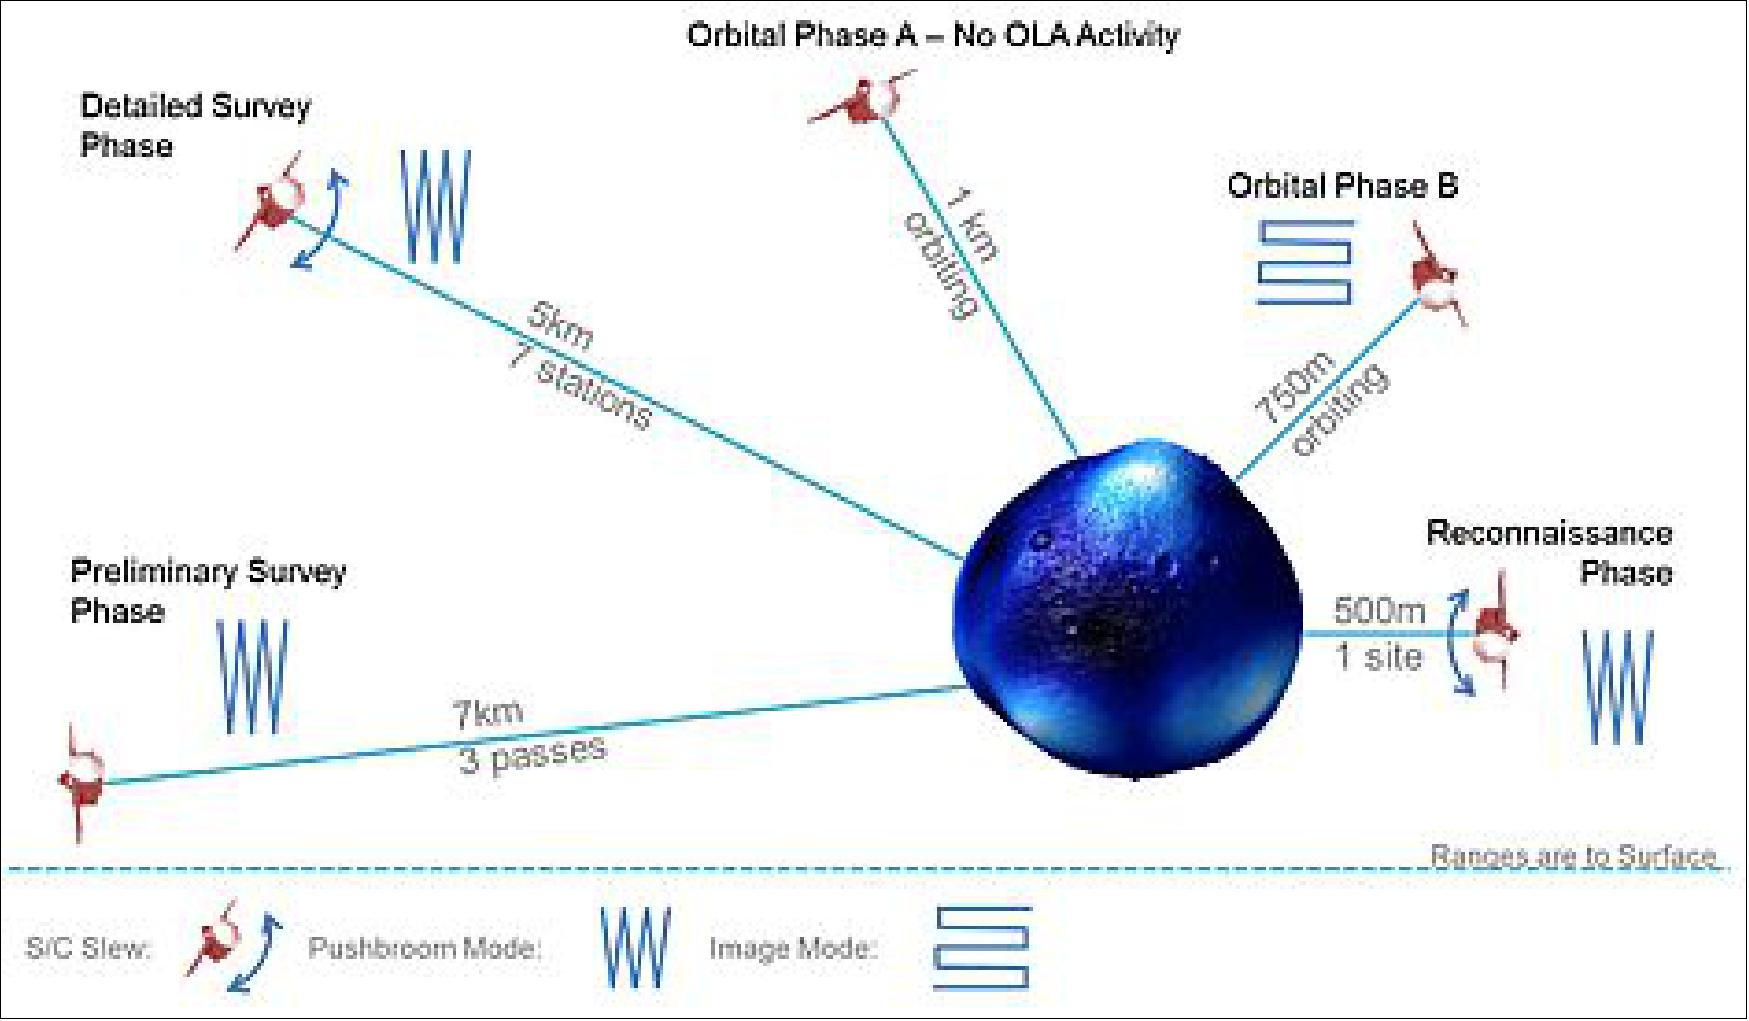 Figure 85: OLA adapts its scan patterns to the operational mode of the spacecraft (image credit: MDA)